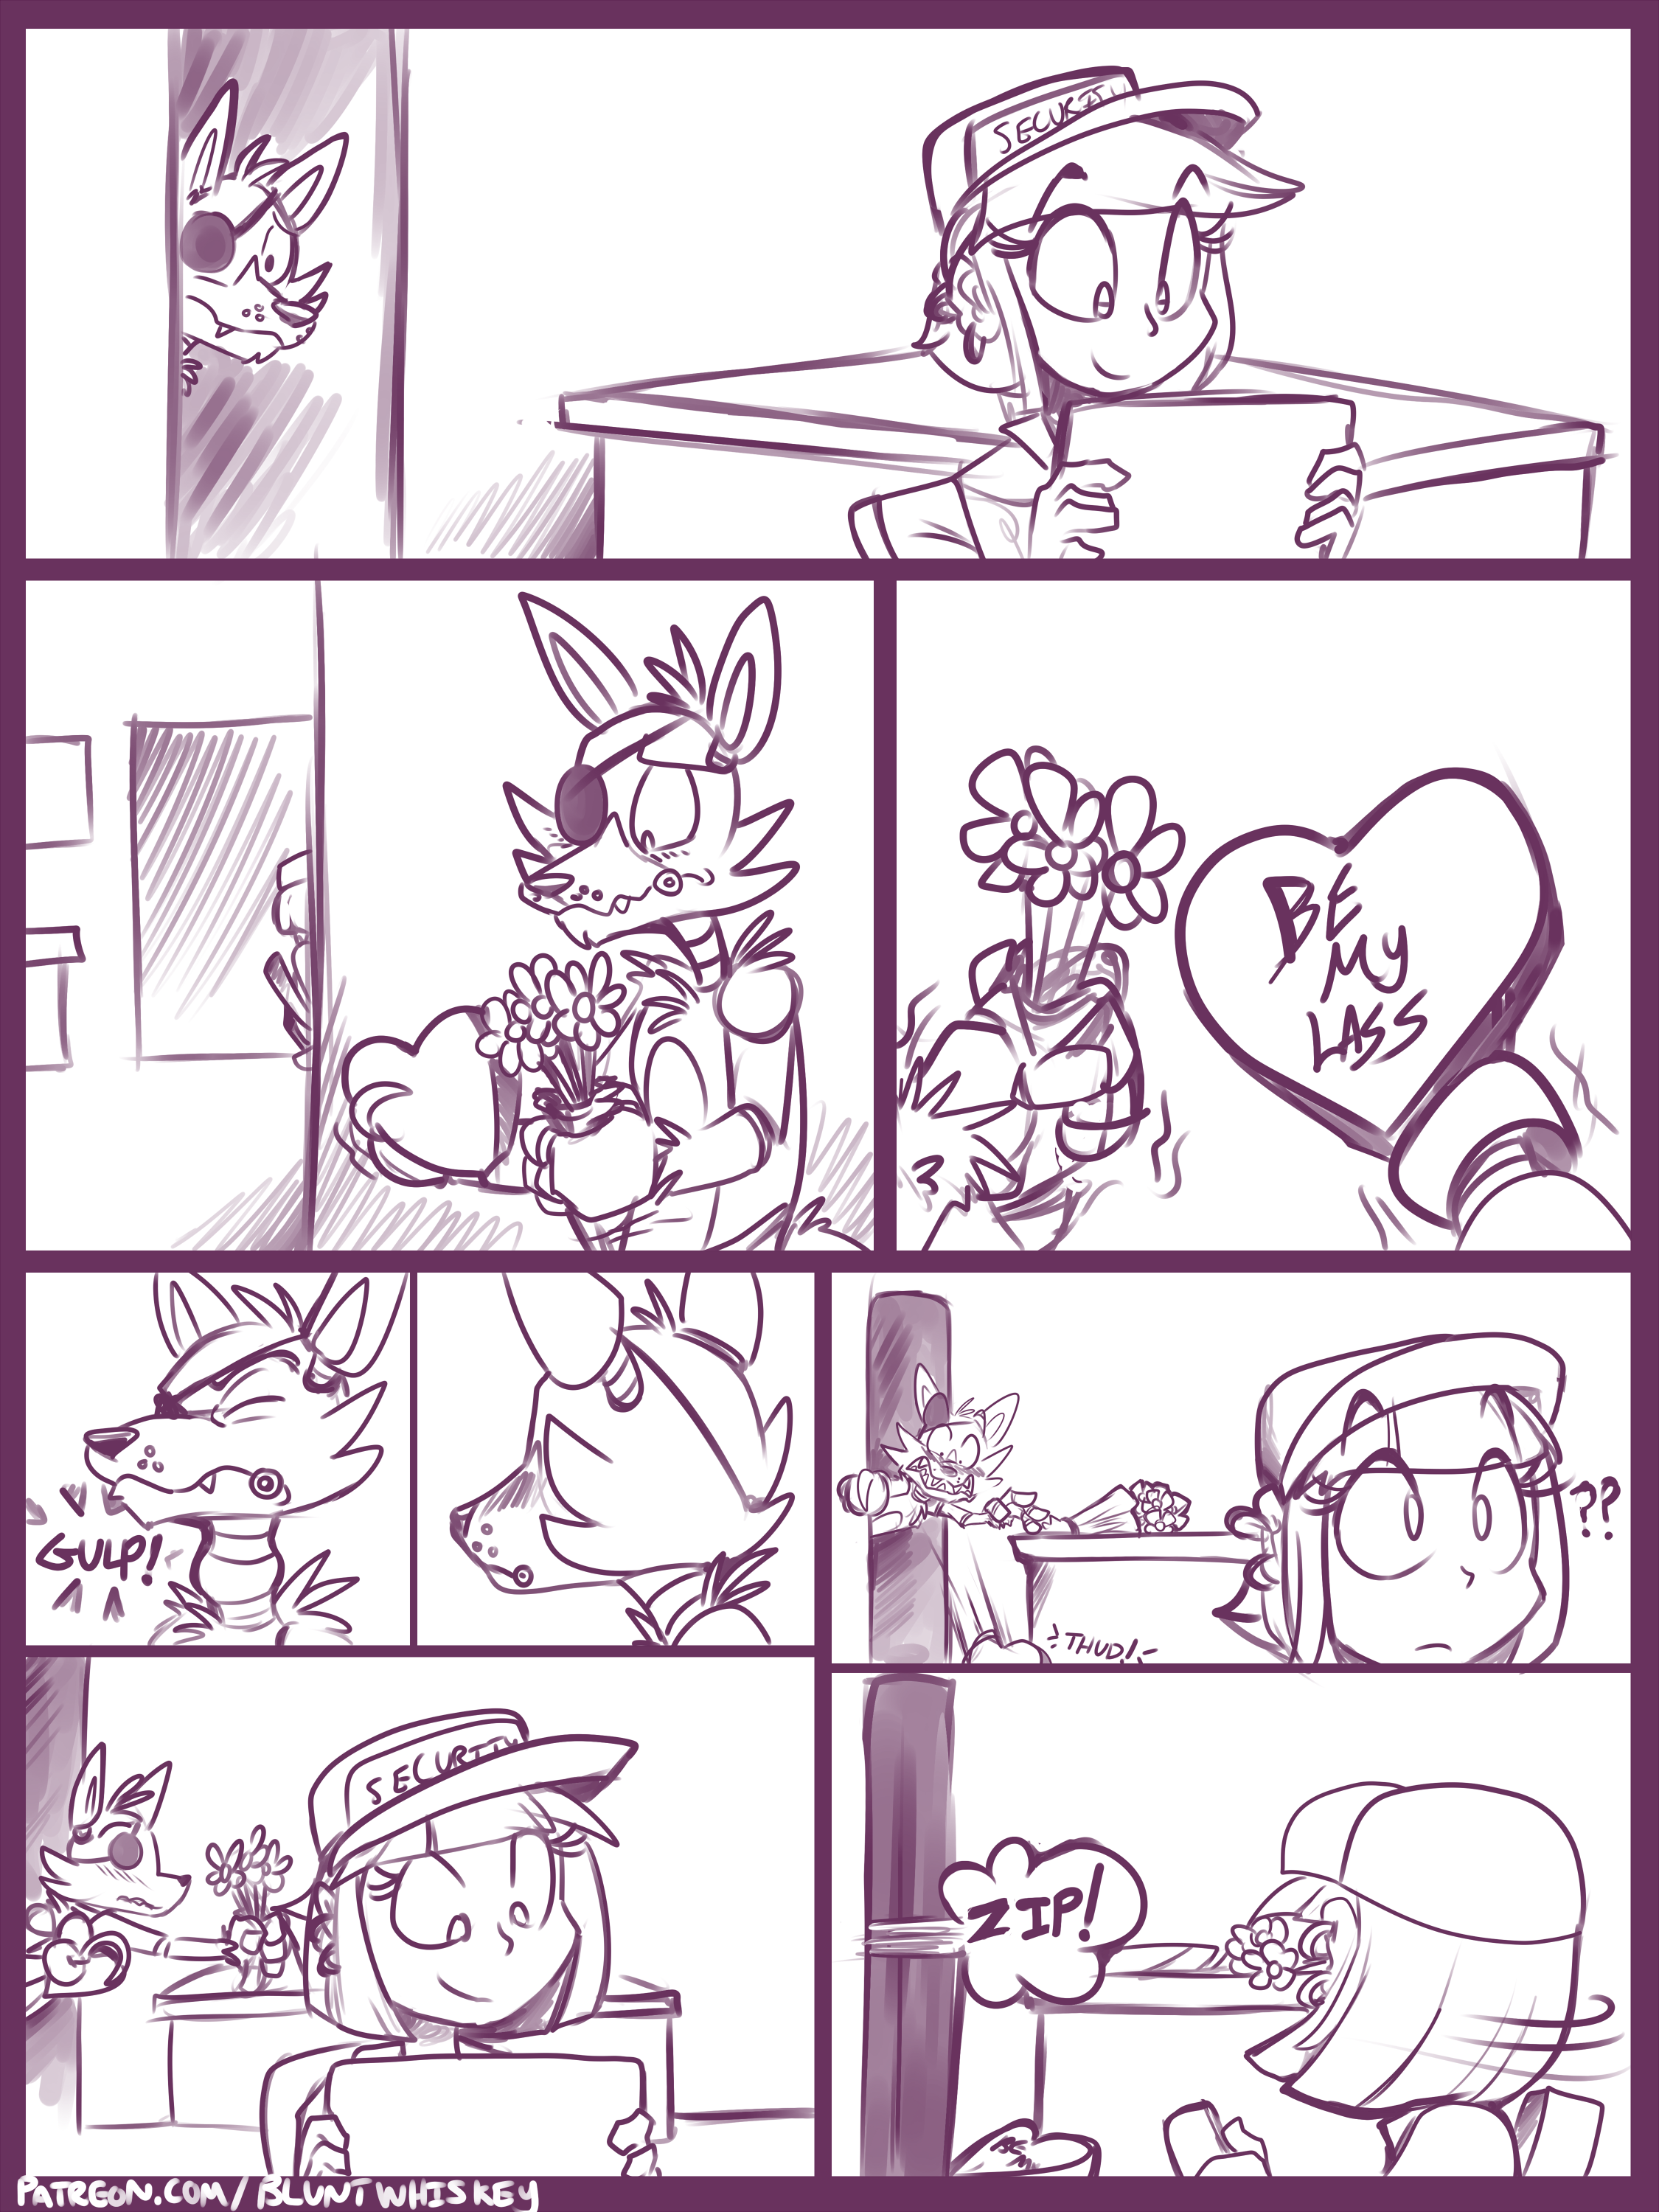 FNAF - Wooing the Security Guard. 